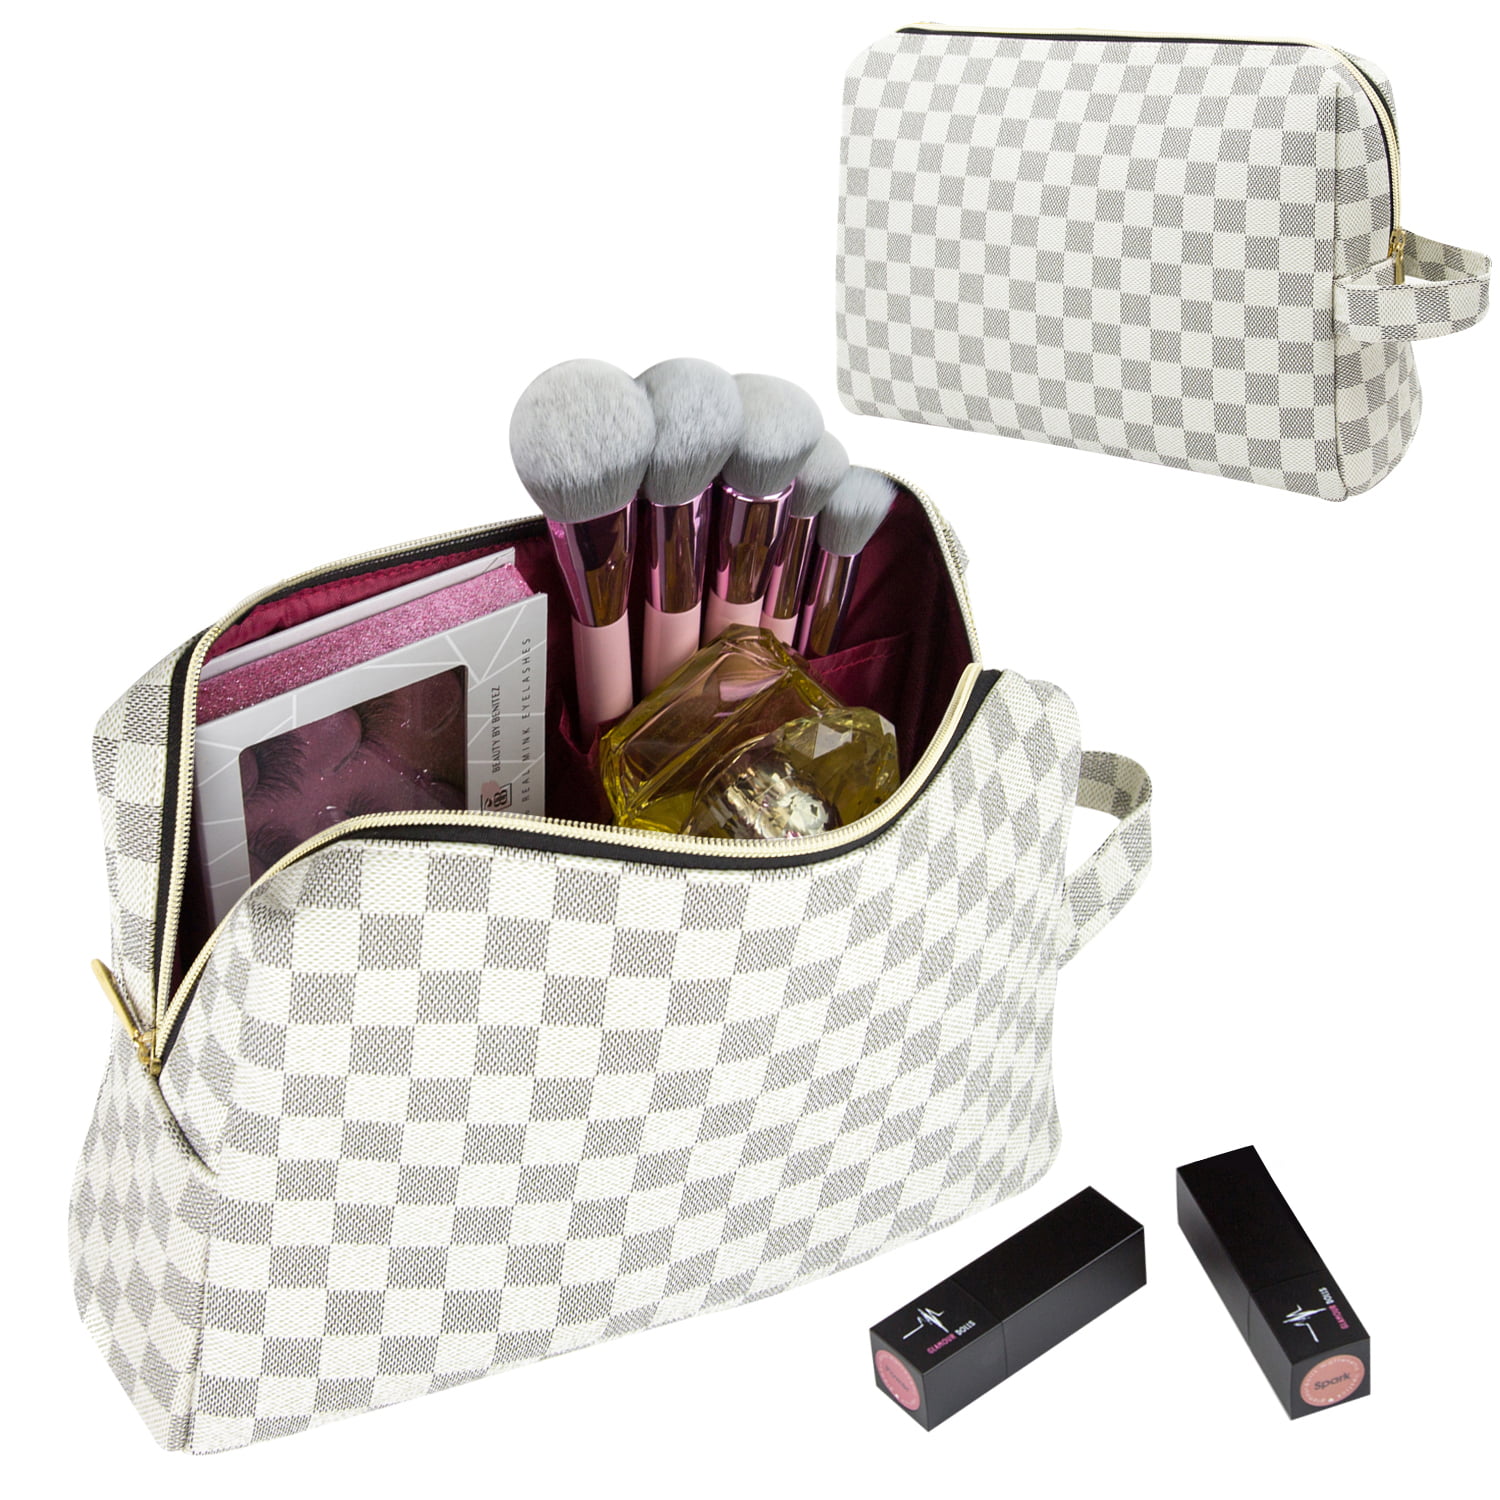 Luxouria Checkered Makeup Bag for Women - Luxury Travel Cosmetic Bags -  Leather Toiletry Pouch - Walmart.com